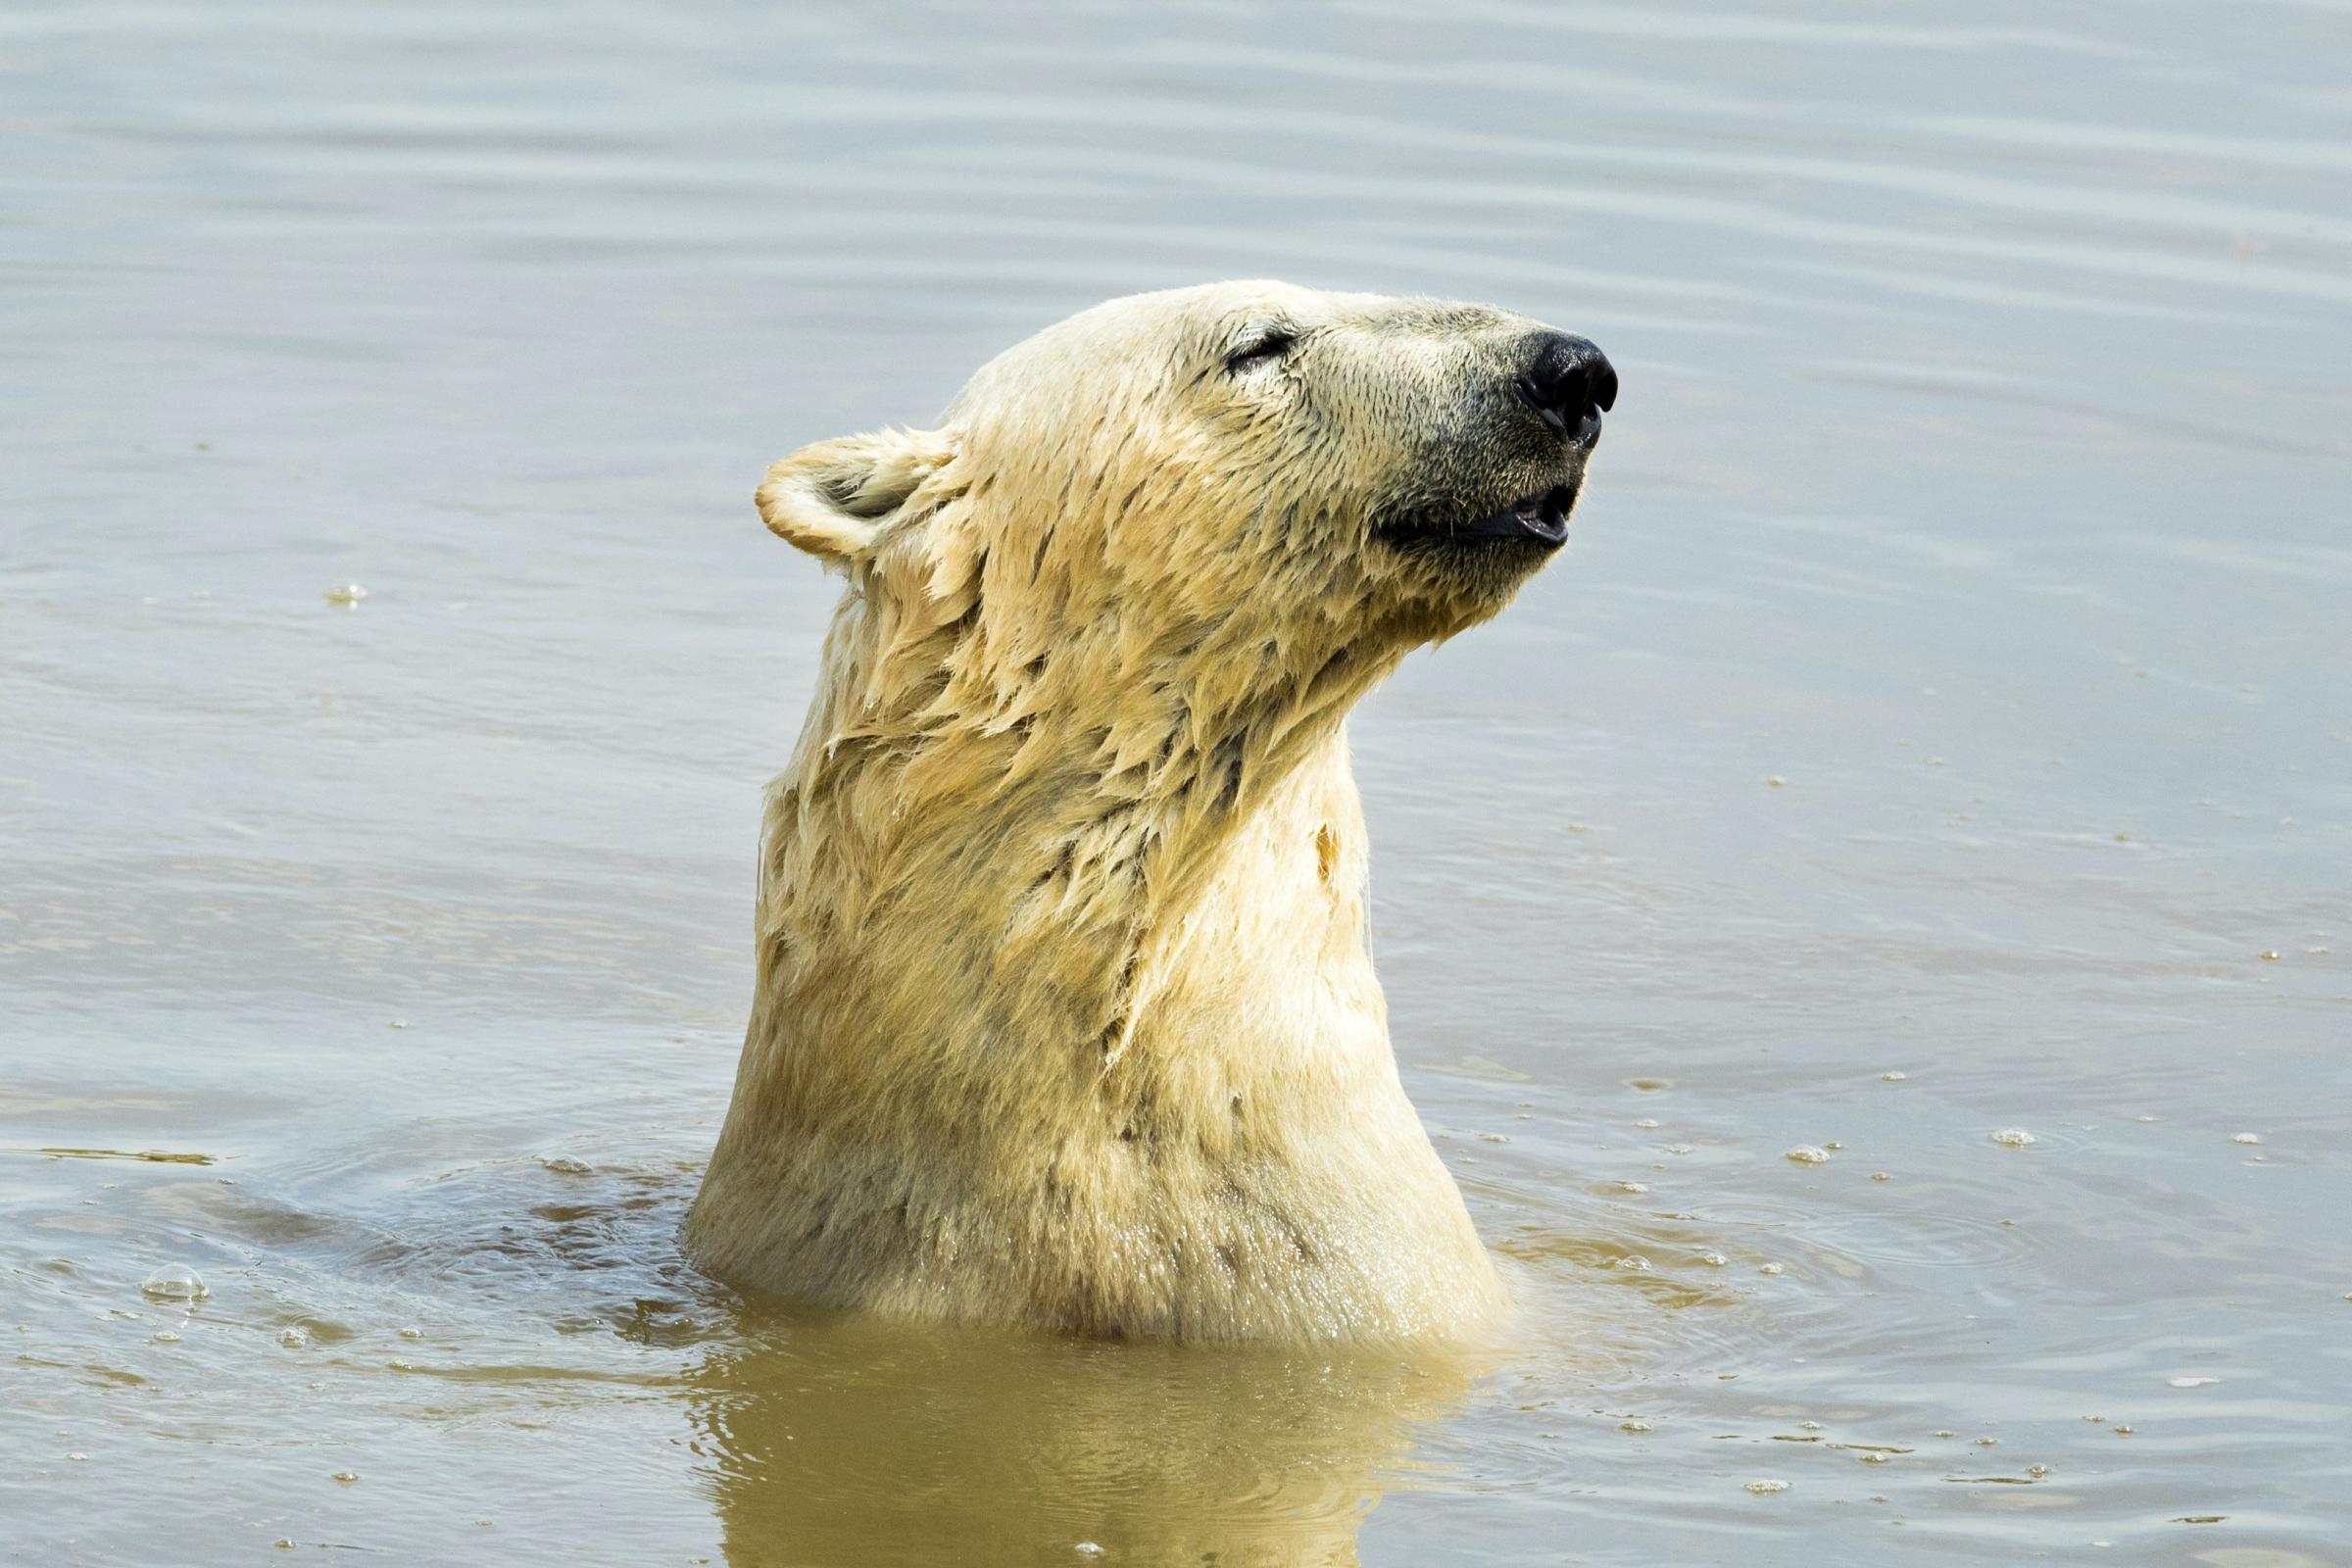 Global warming could see most polar bears disappear from Arctic by 2100 – study - Basingstoke Gazette